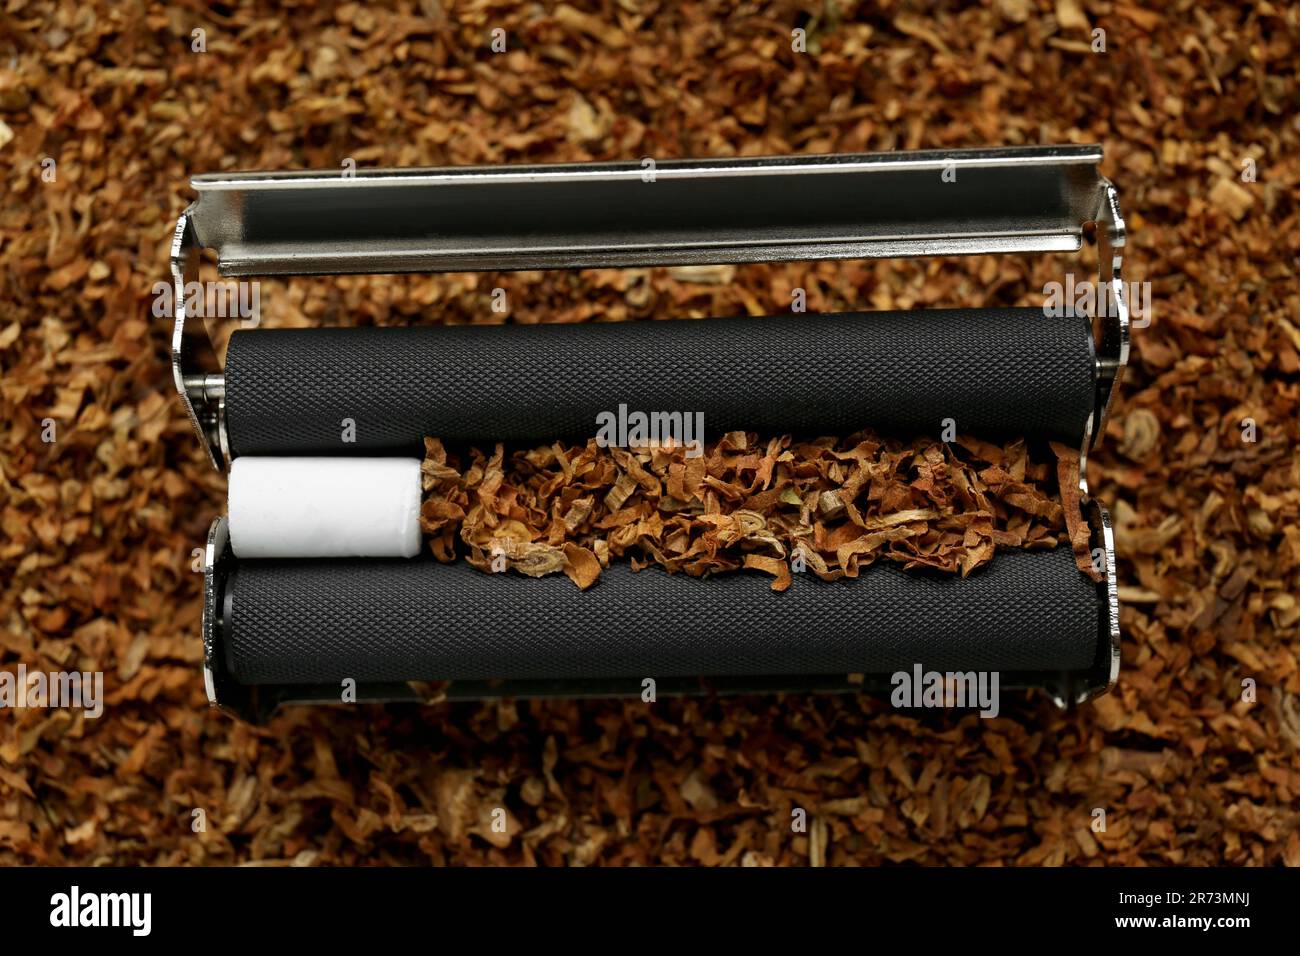 Roller with filter and tobacco, closeup view. Making hand rolled cigarette Stock Photo